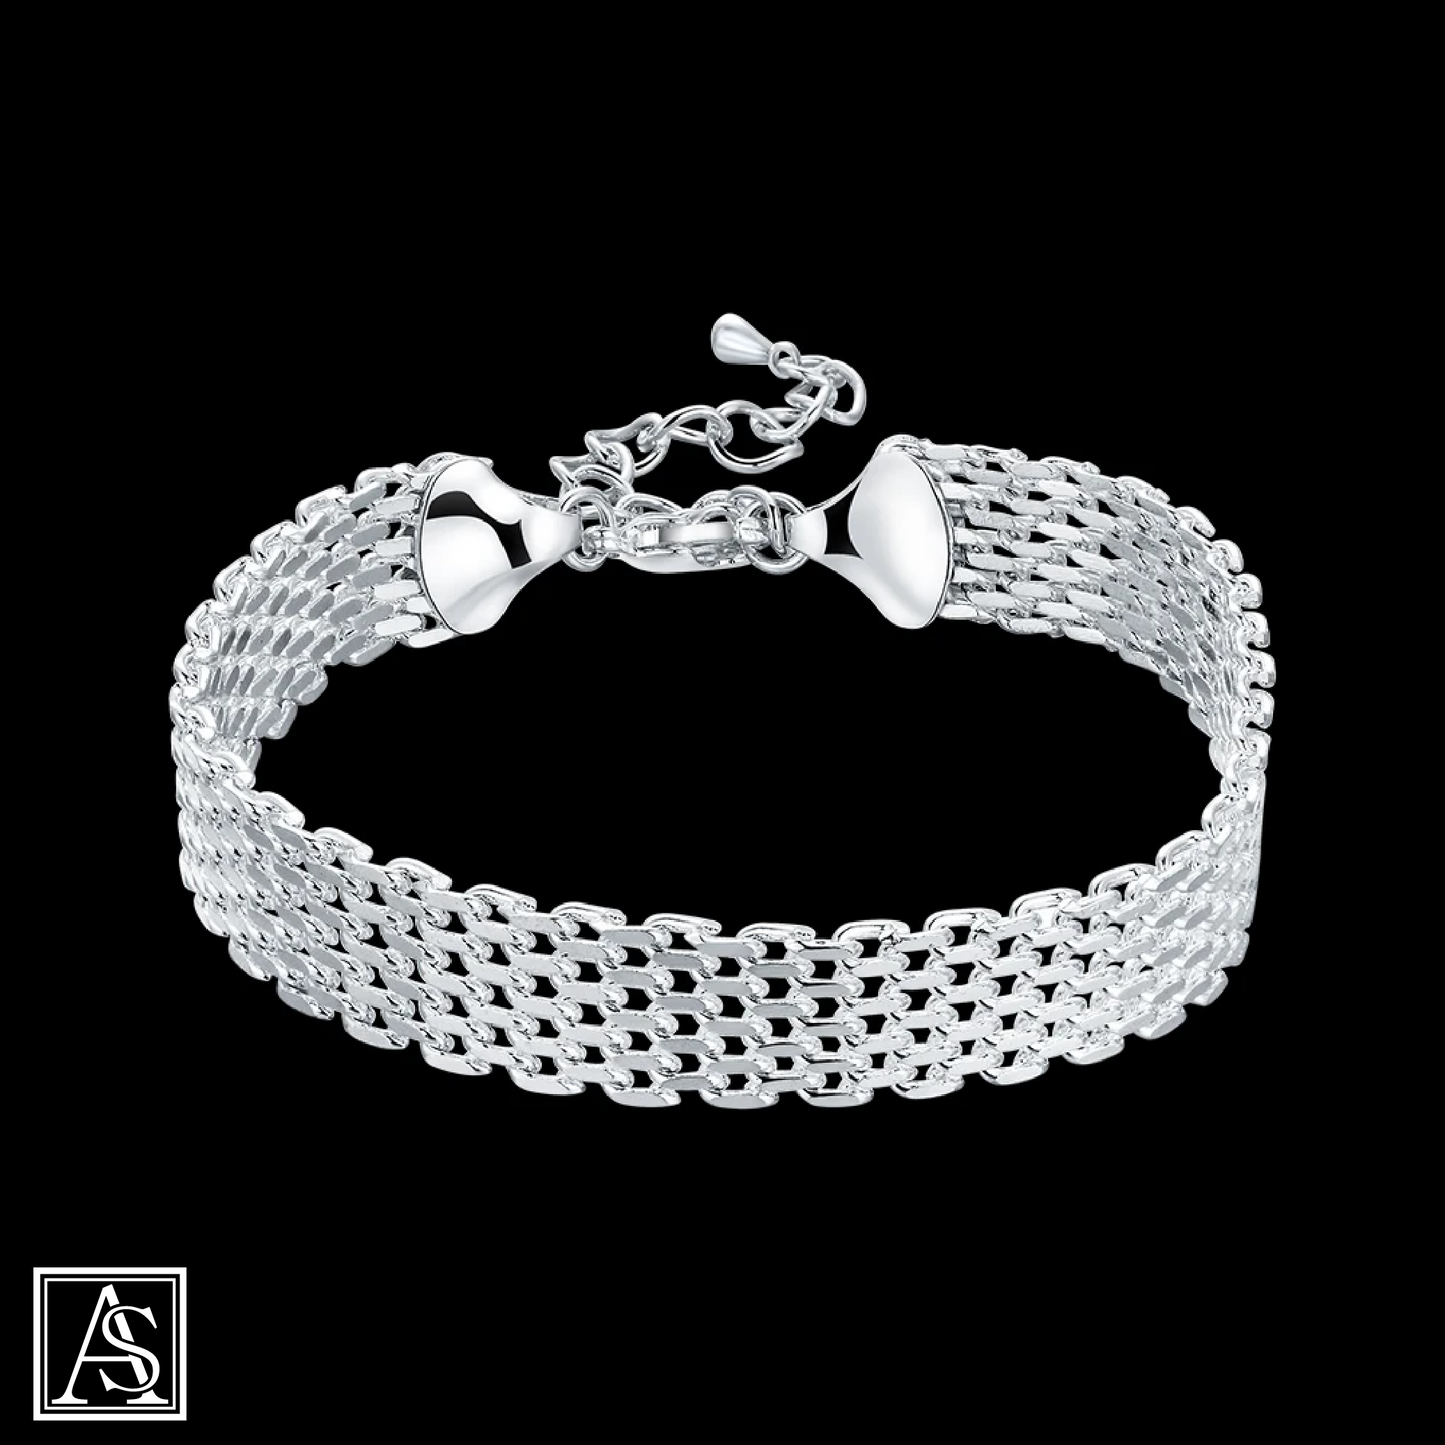 ASIL STORE : 925 Sterling Silver Square Solid Chain Bracelet For Women Men ( Free shipping )
Model number : 301